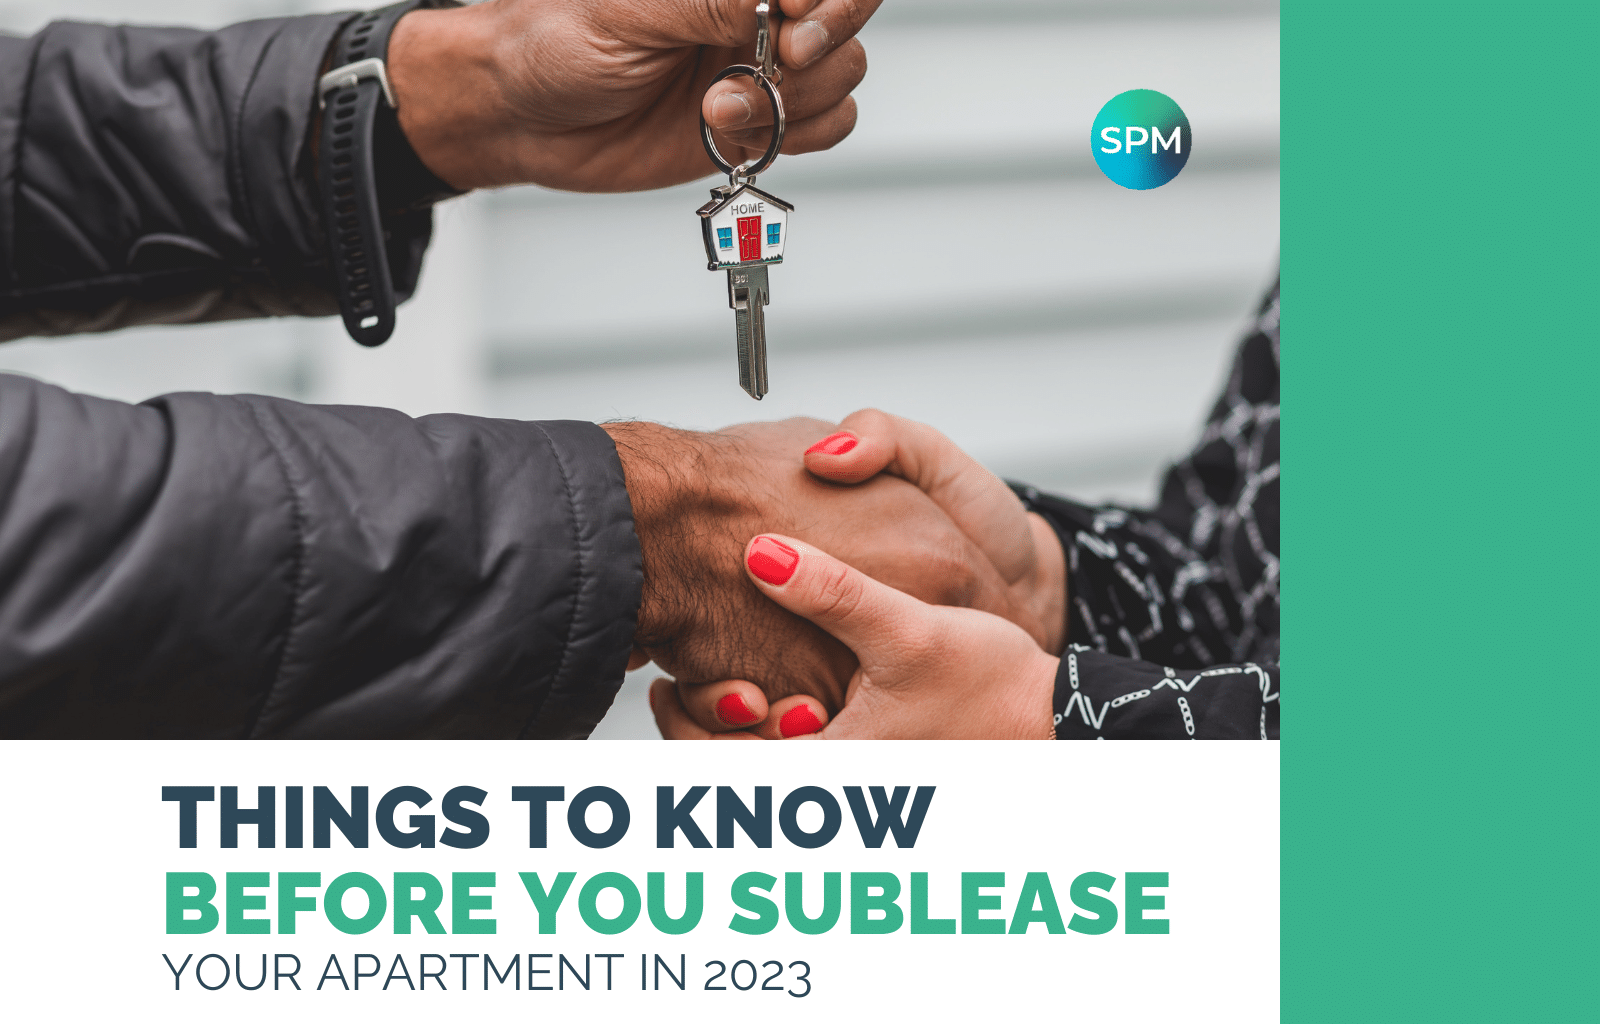 Sublease Your Apartment